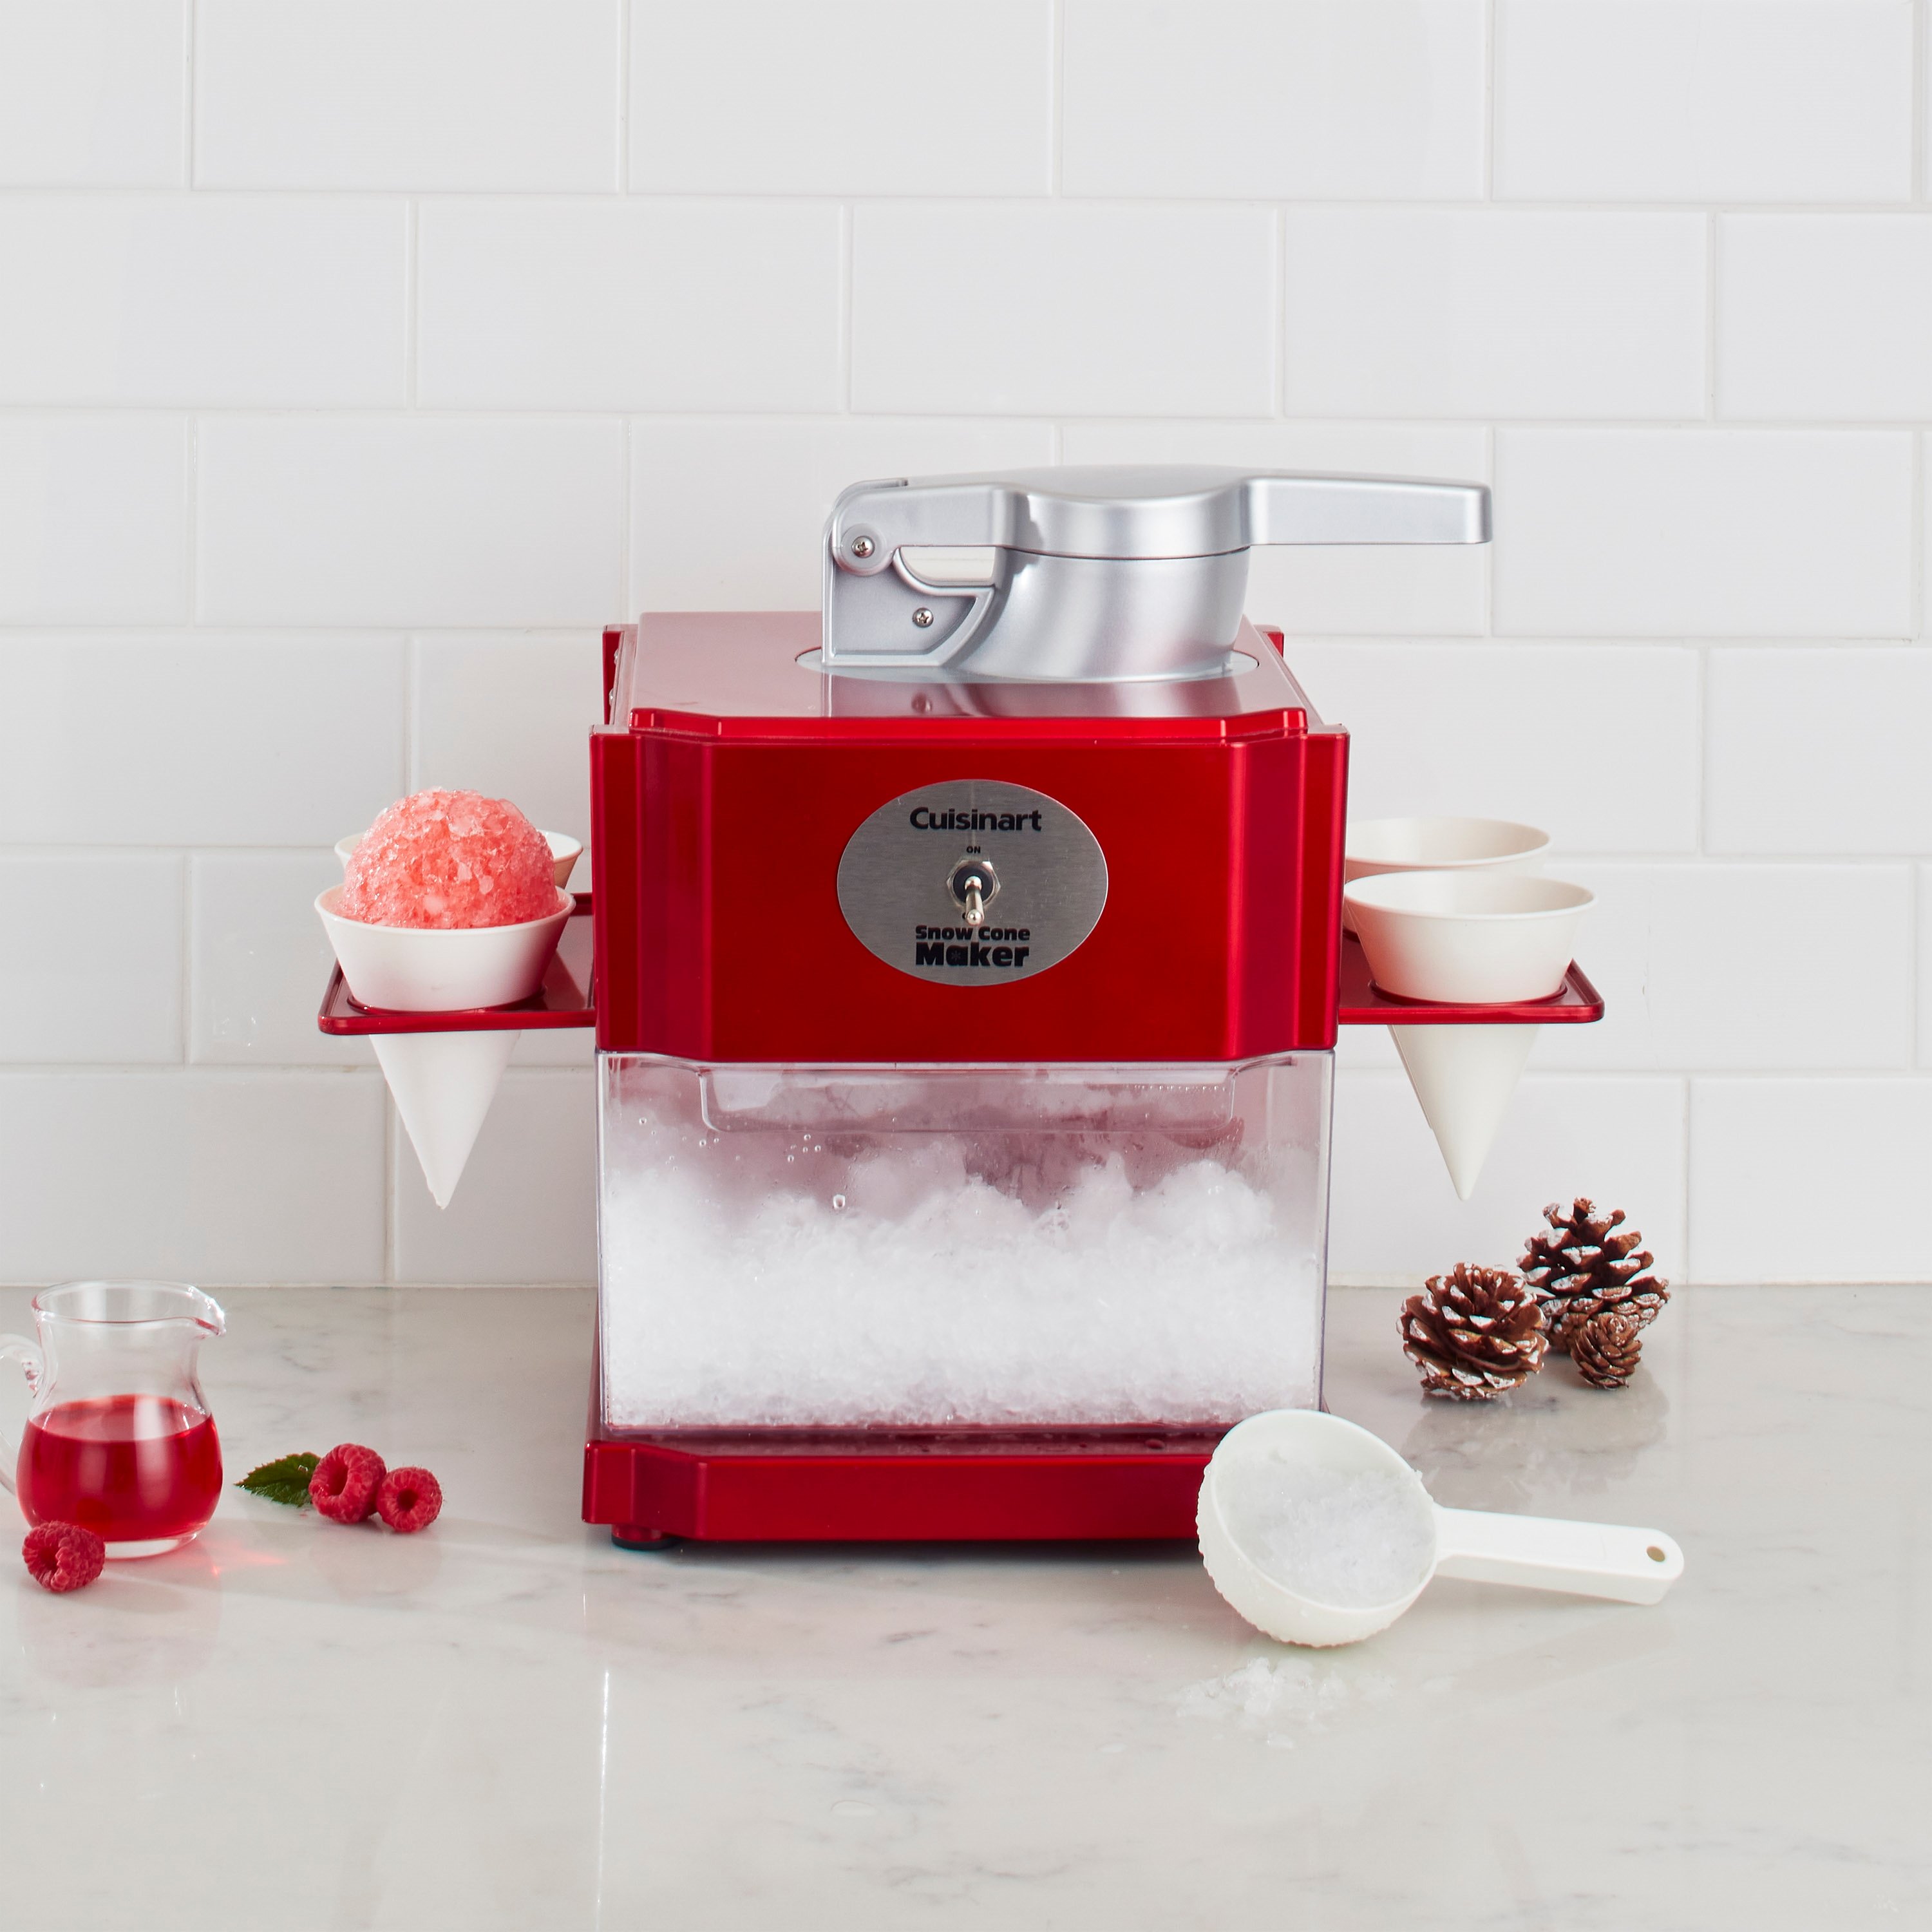 DIY Smoothie Machine Icy Drink Smoothie Maker Small Shaved Ice Cotton Ice  Machine Flavored Healthy Snacks